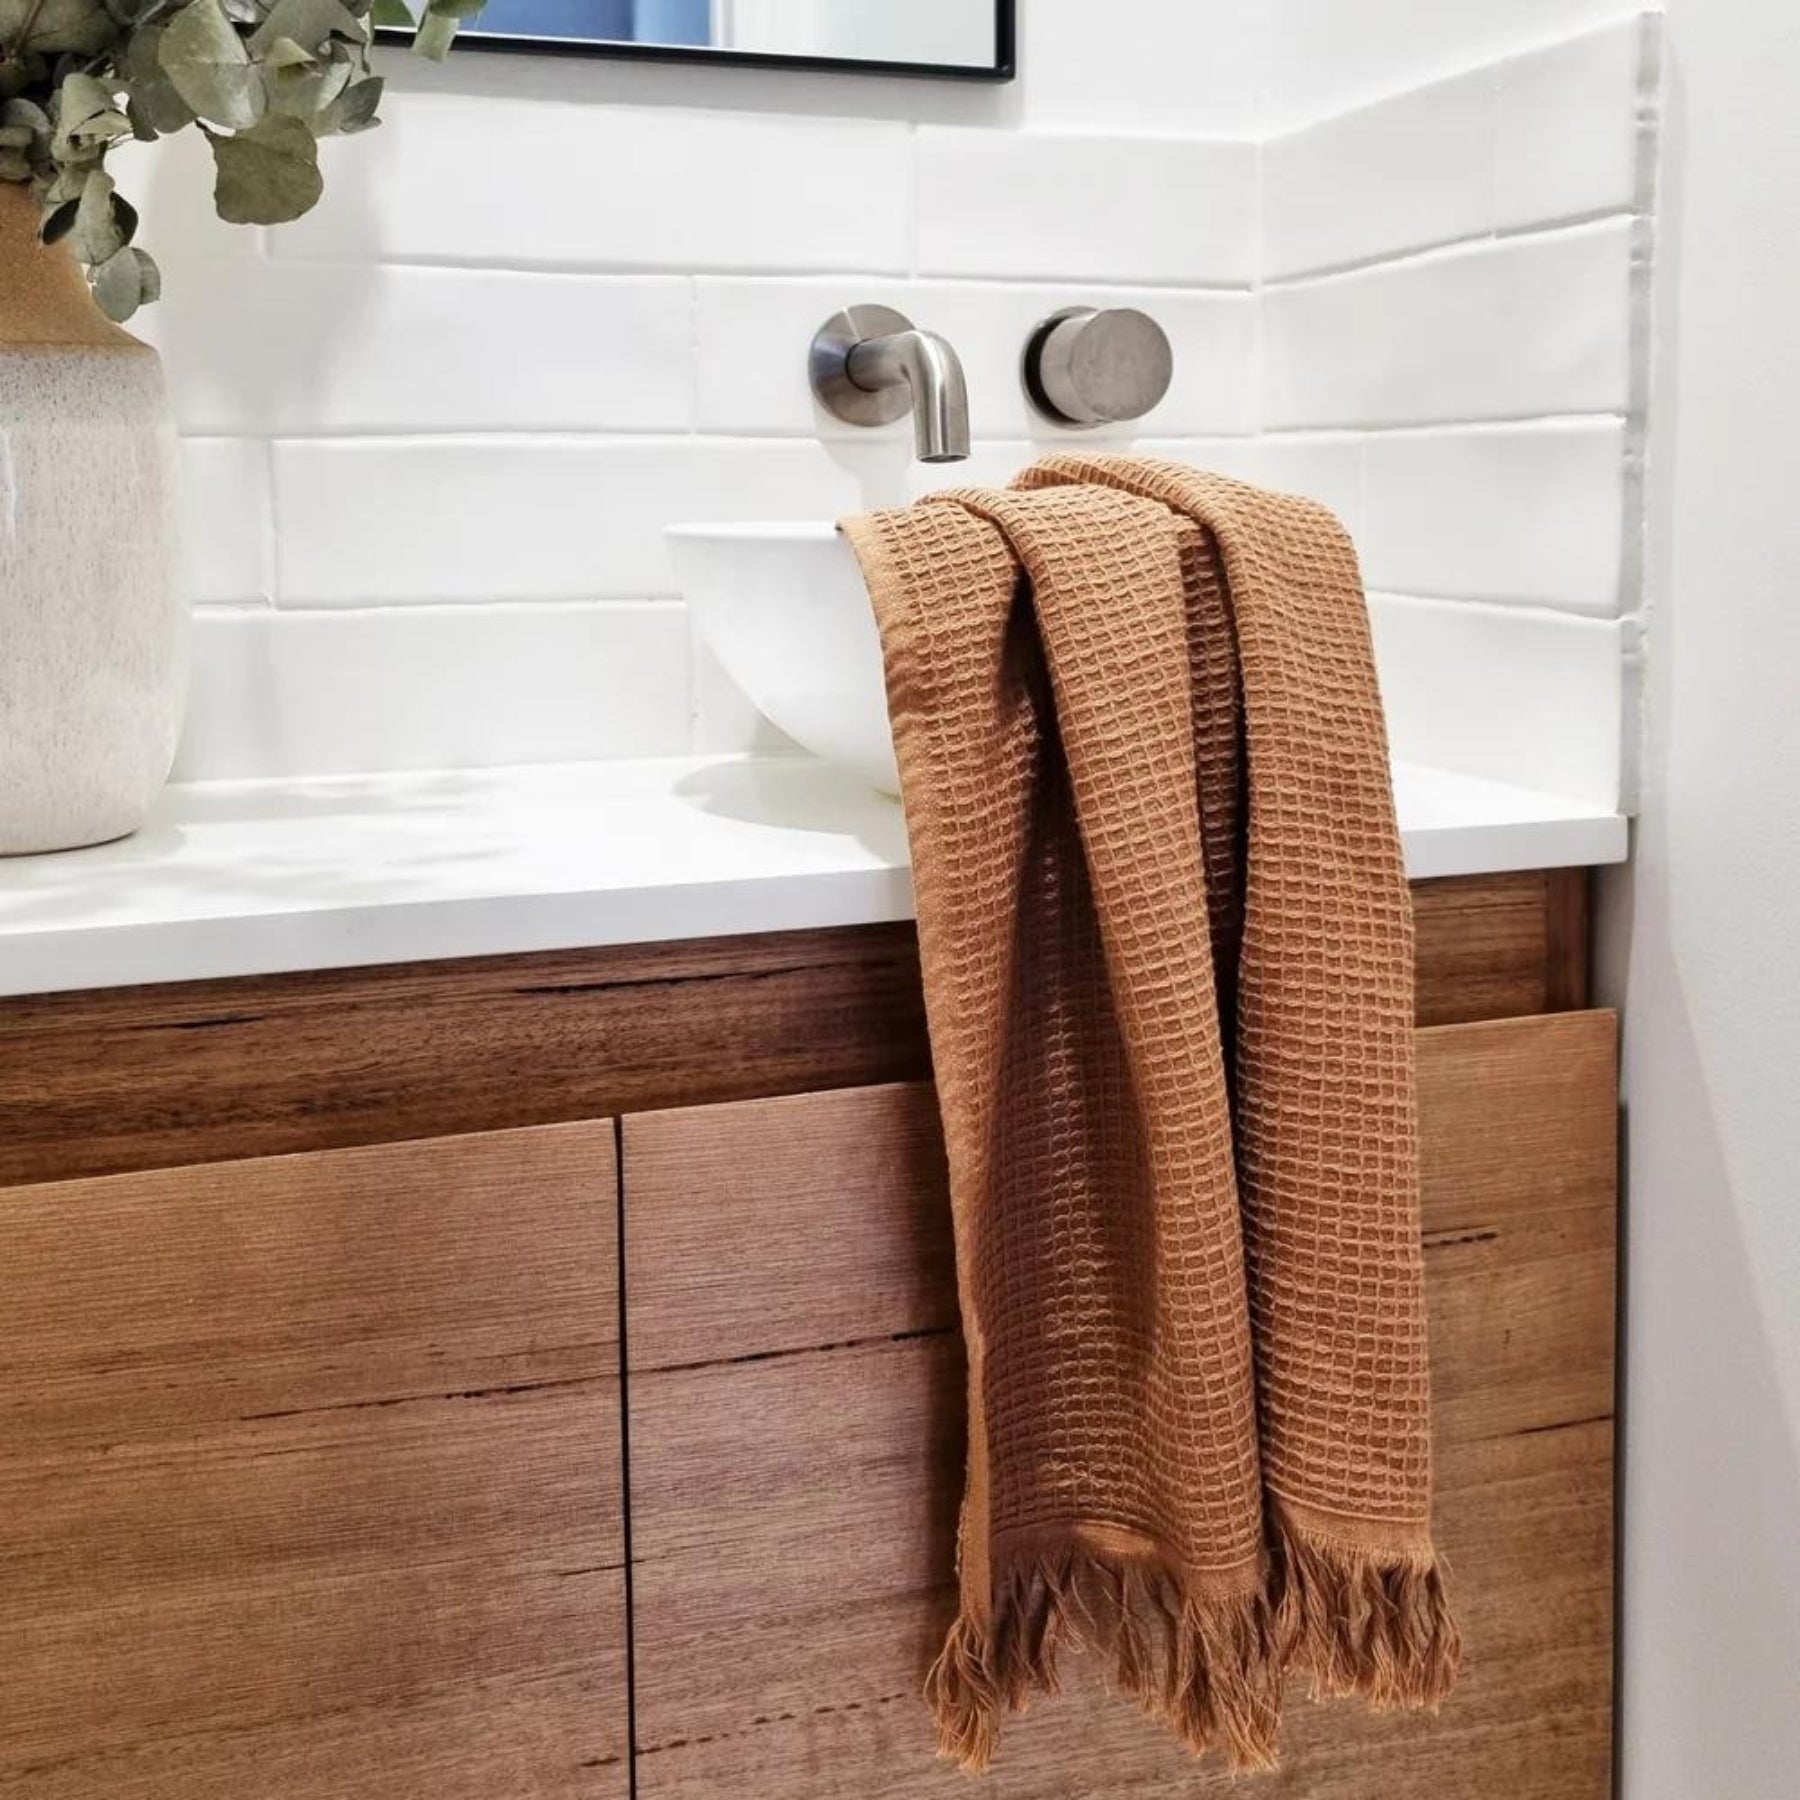 Set of 2 Camila Waffle Hand Towels in Earth, versatile for both kitchen and bathroom use.